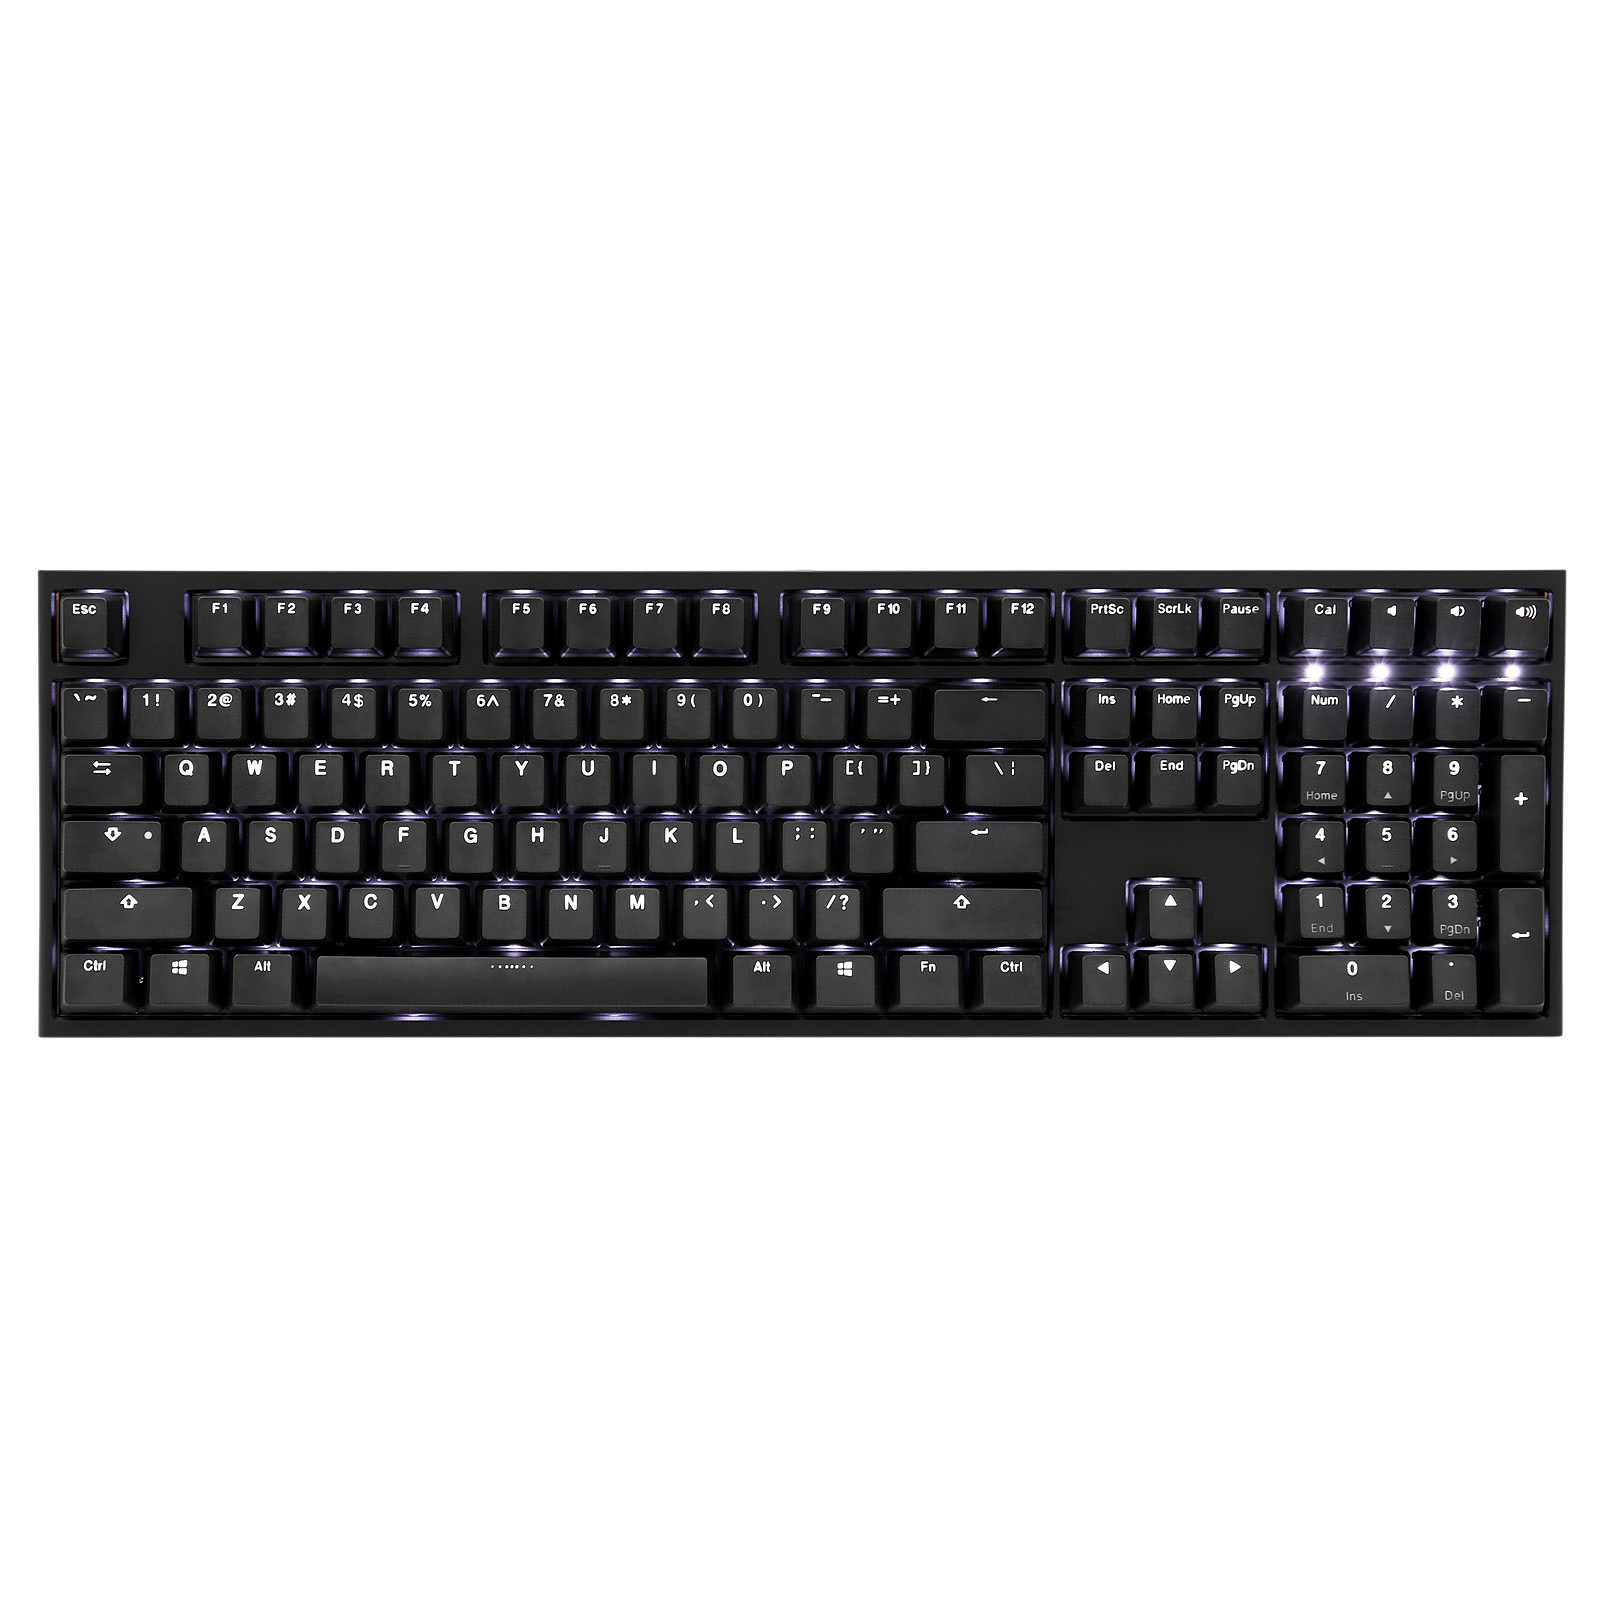 Ducky Channel One 2 Backlit (coloris noir - Cherry MX Brown - LEDs blanches) - Clavier PC Ducky Channel